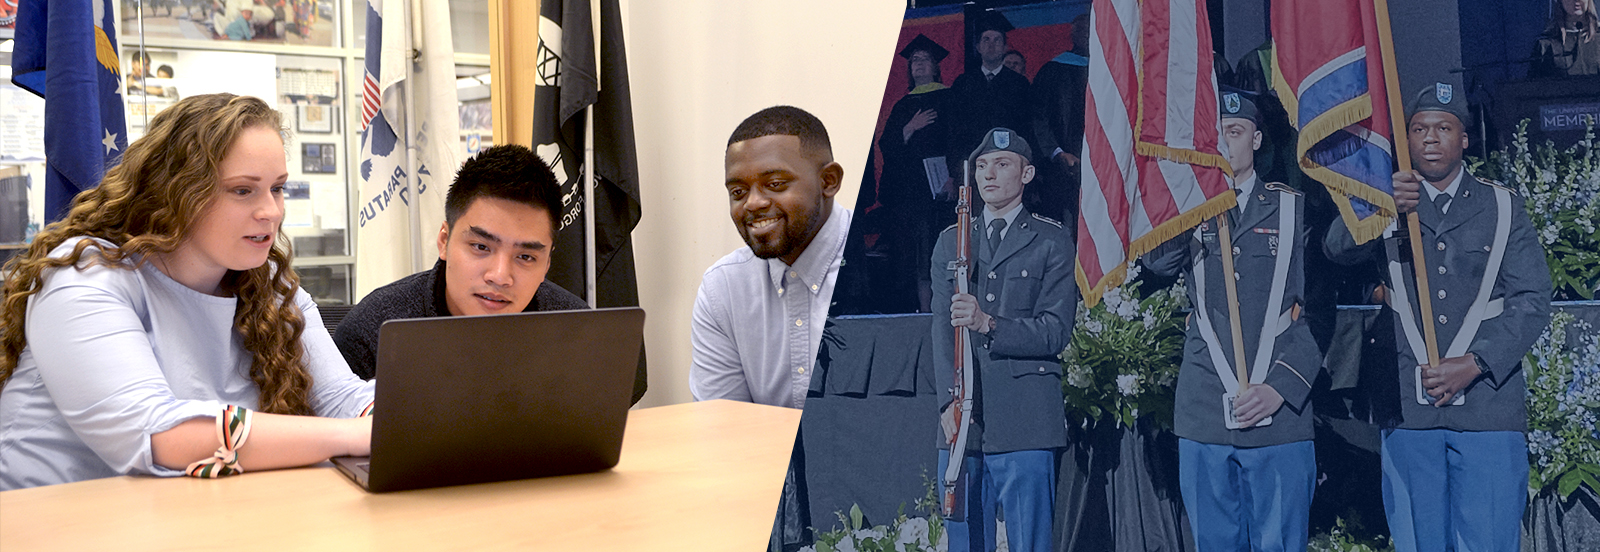 header image with 2 photos: advisor meeting with 2 students in VRC; ROTC members with flags at Commencement Ceremony